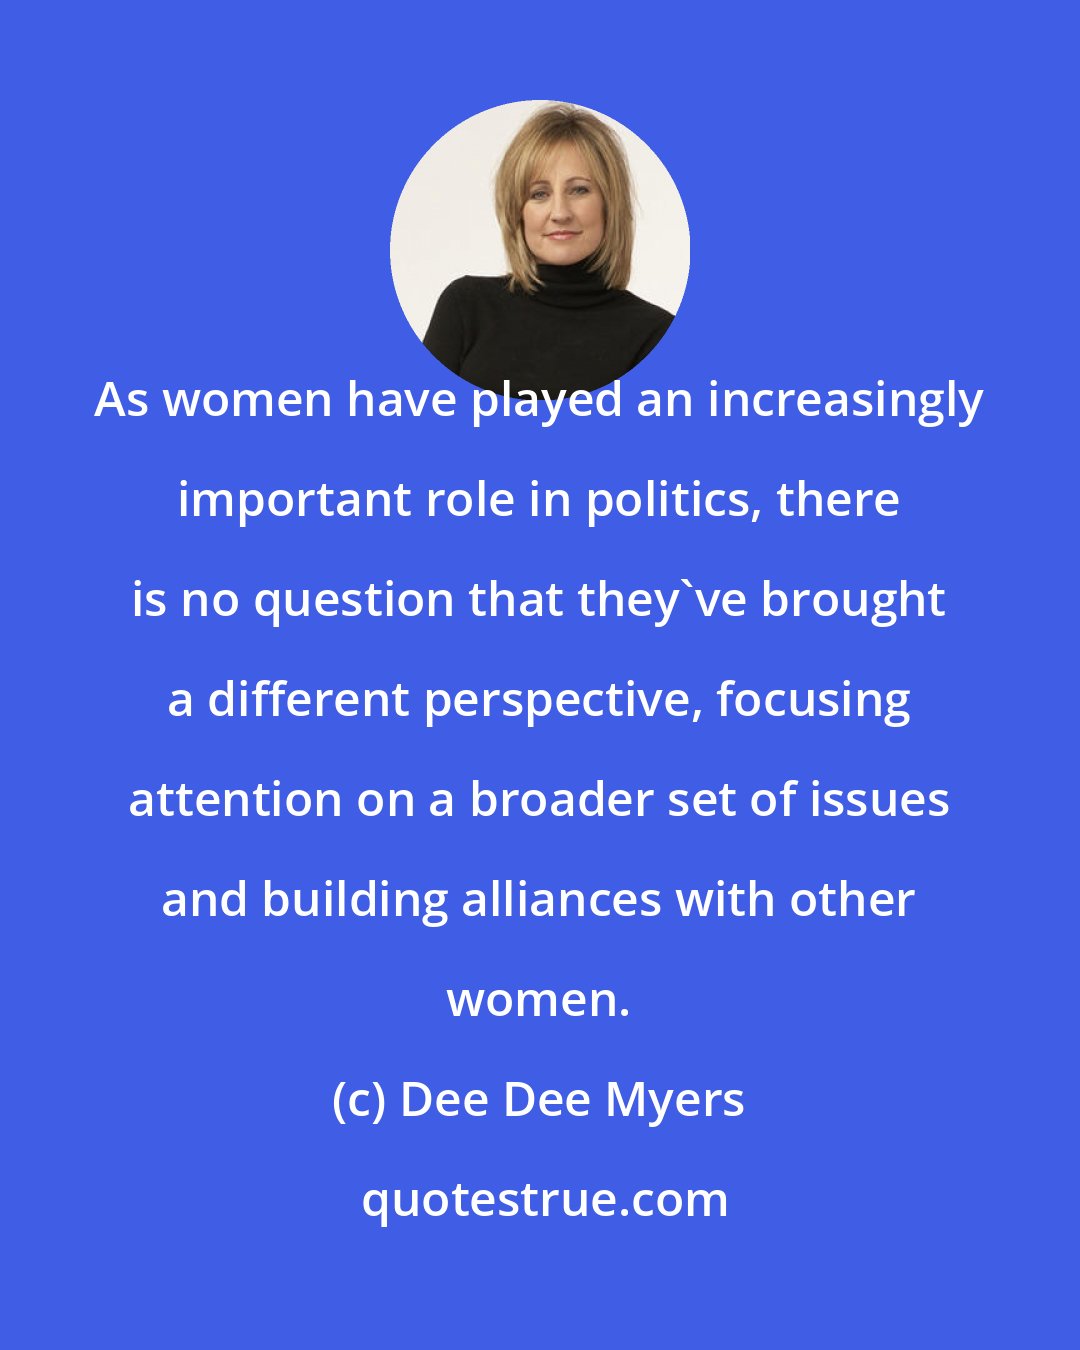 Dee Dee Myers: As women have played an increasingly important role in politics, there is no question that they've brought a different perspective, focusing attention on a broader set of issues and building alliances with other women.